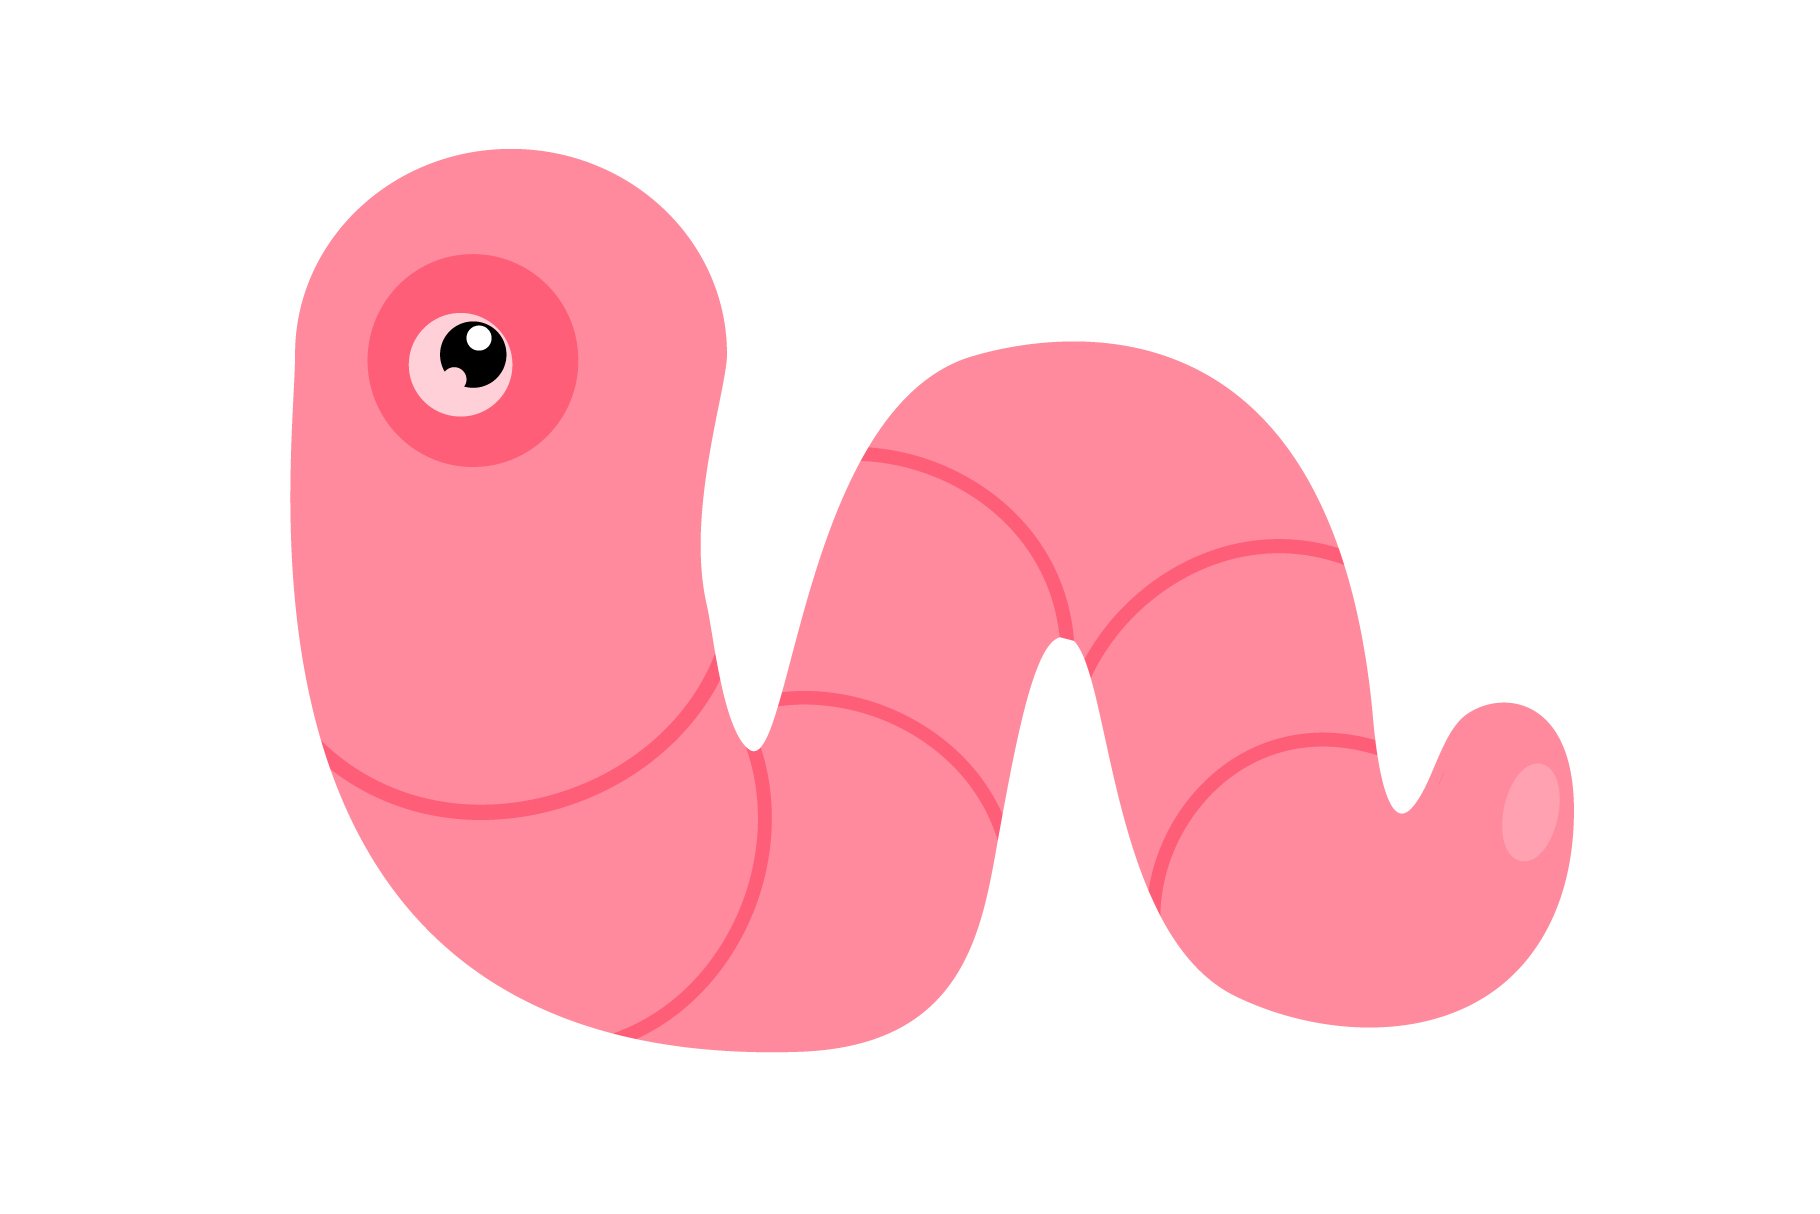 Worm icon. Smiling cartoon earthworm cover image.